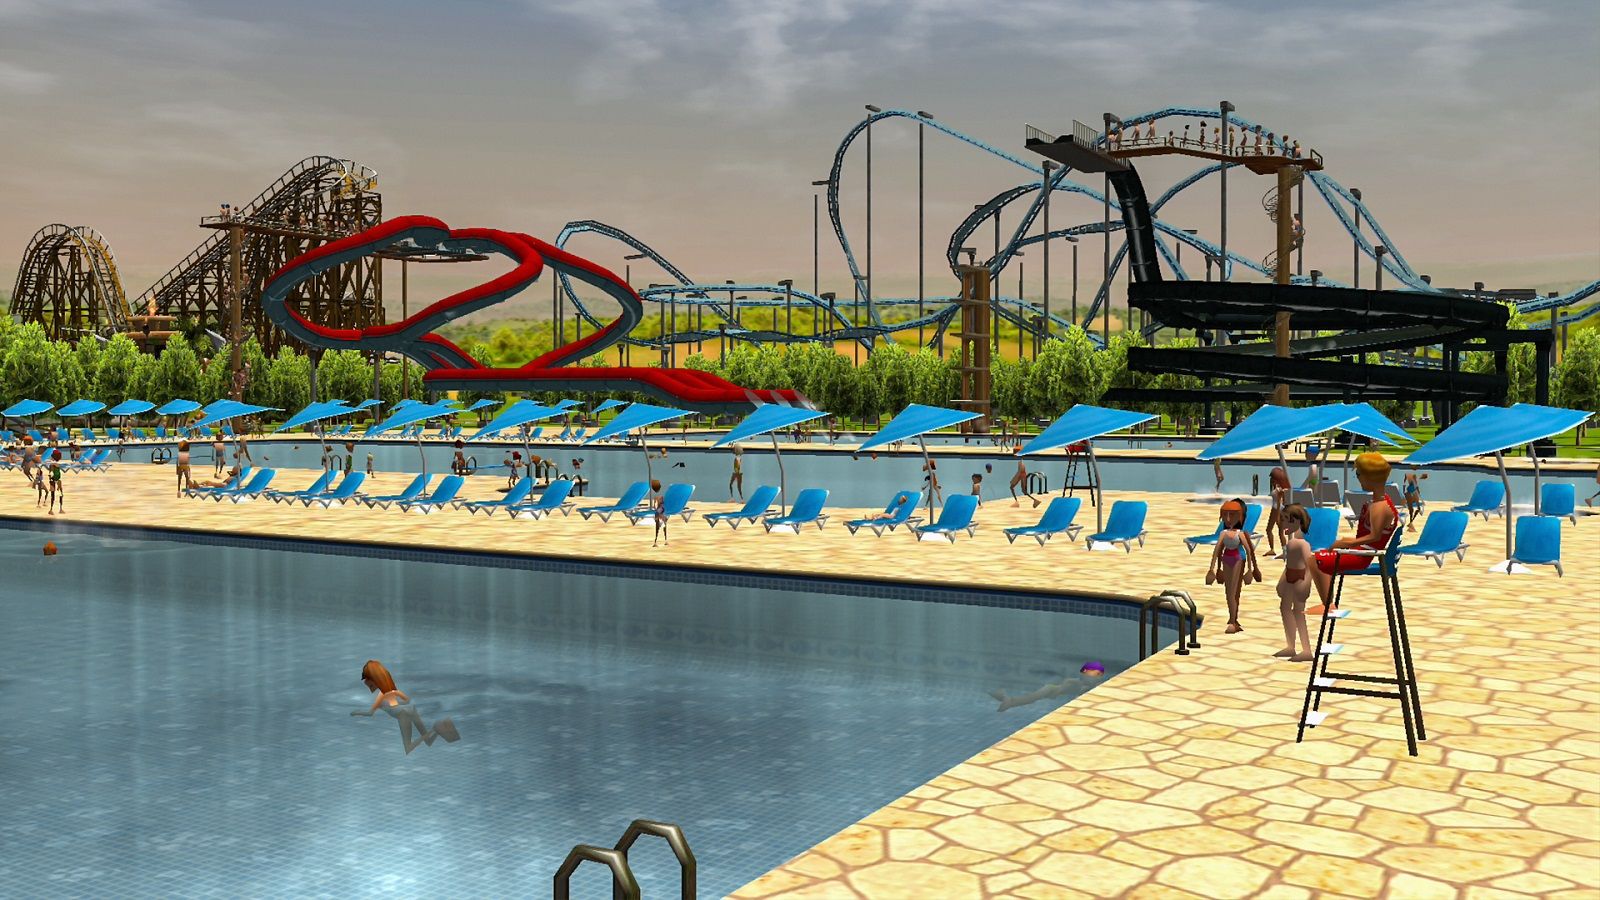 It's time to get soaked and wild as RollerCoaster Tycoon 3: Complete Edition heads to PC and Switch this month